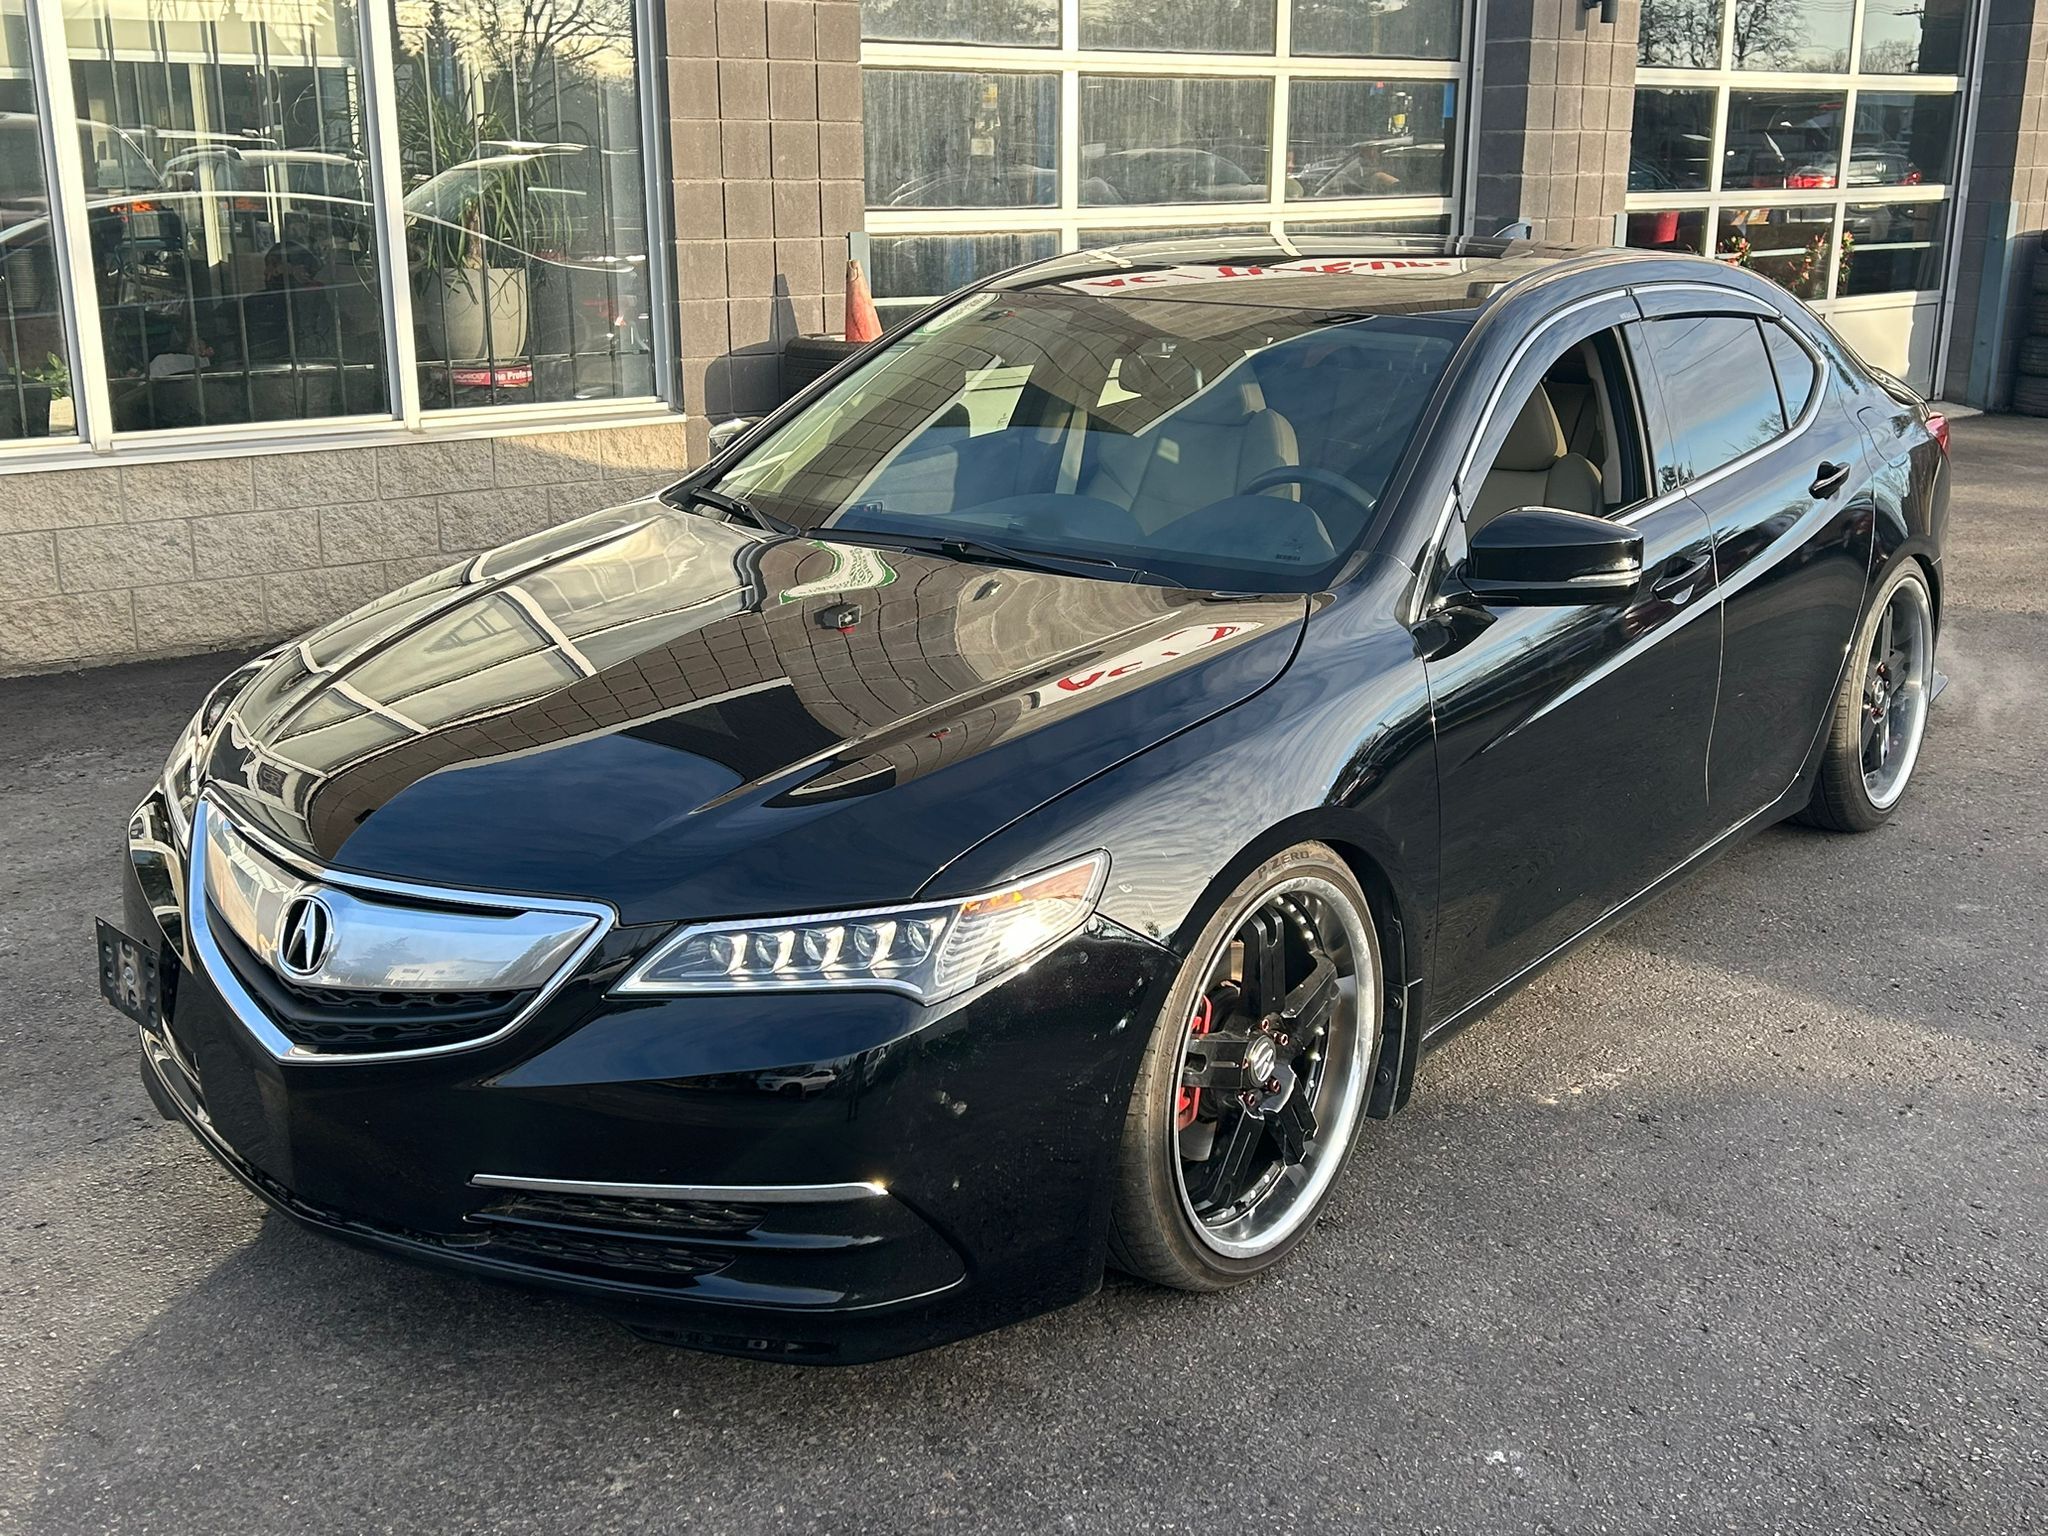 2017 Acura TLX 4dr Sdn SH-AWD V6 Camera Blue Tooth Certified